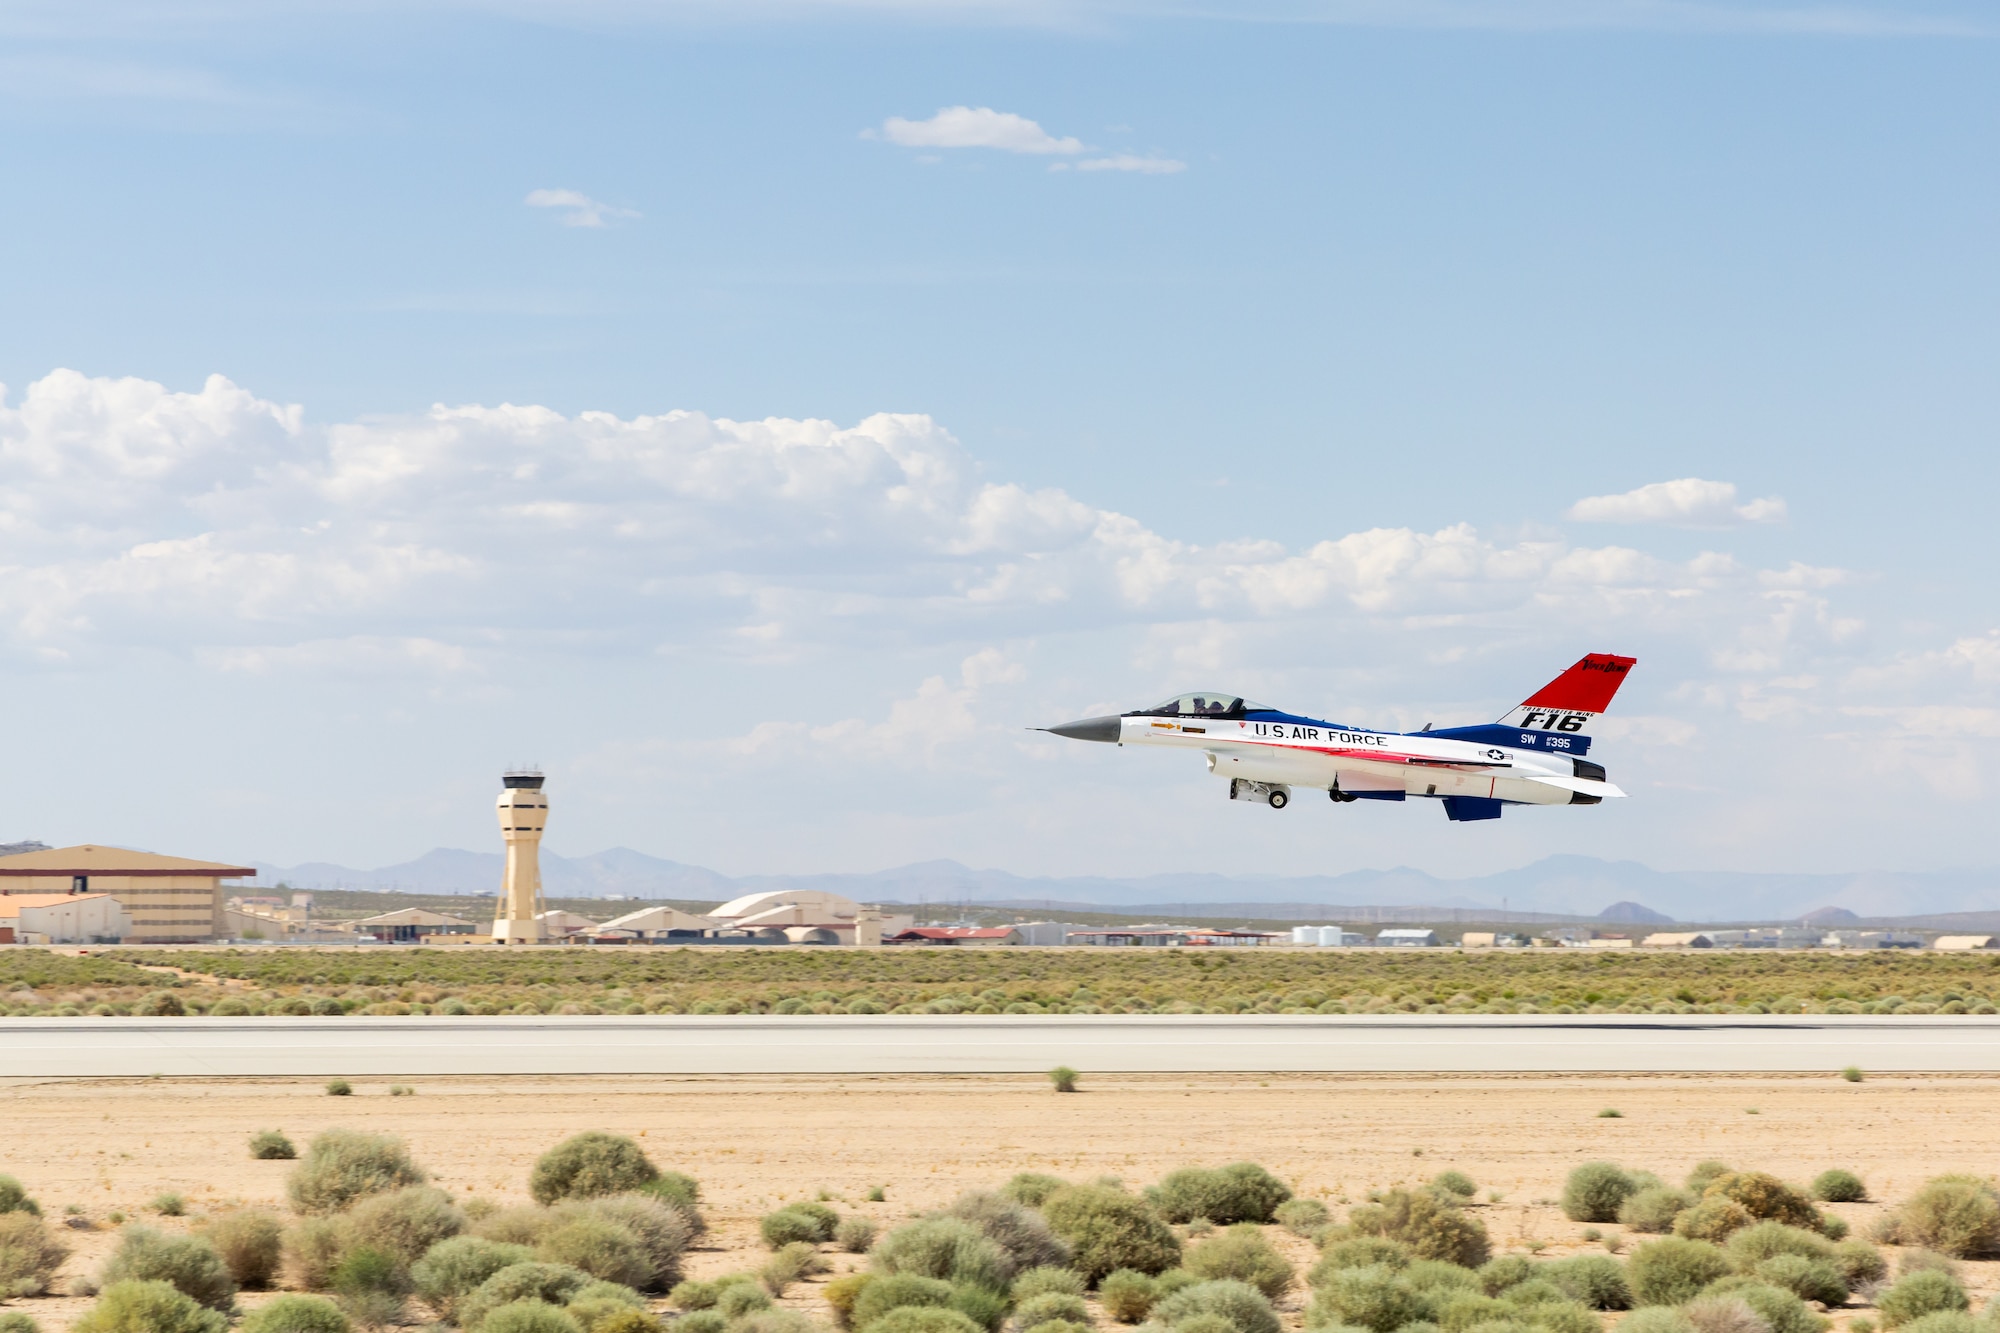 The F-16 Viper Demonstration Team jet flies above Edwards Air Force, California, May 13. The 412th Maintenance Group, Fabrication Flight - Corrosion Control Team recently repainted the F-16 Viper Demo Team aircraft in the classic YF-16 livery to commemorate the platform's first flight 50 years ago at Edwards Air Force Base, California. (Air Force photo by James West)